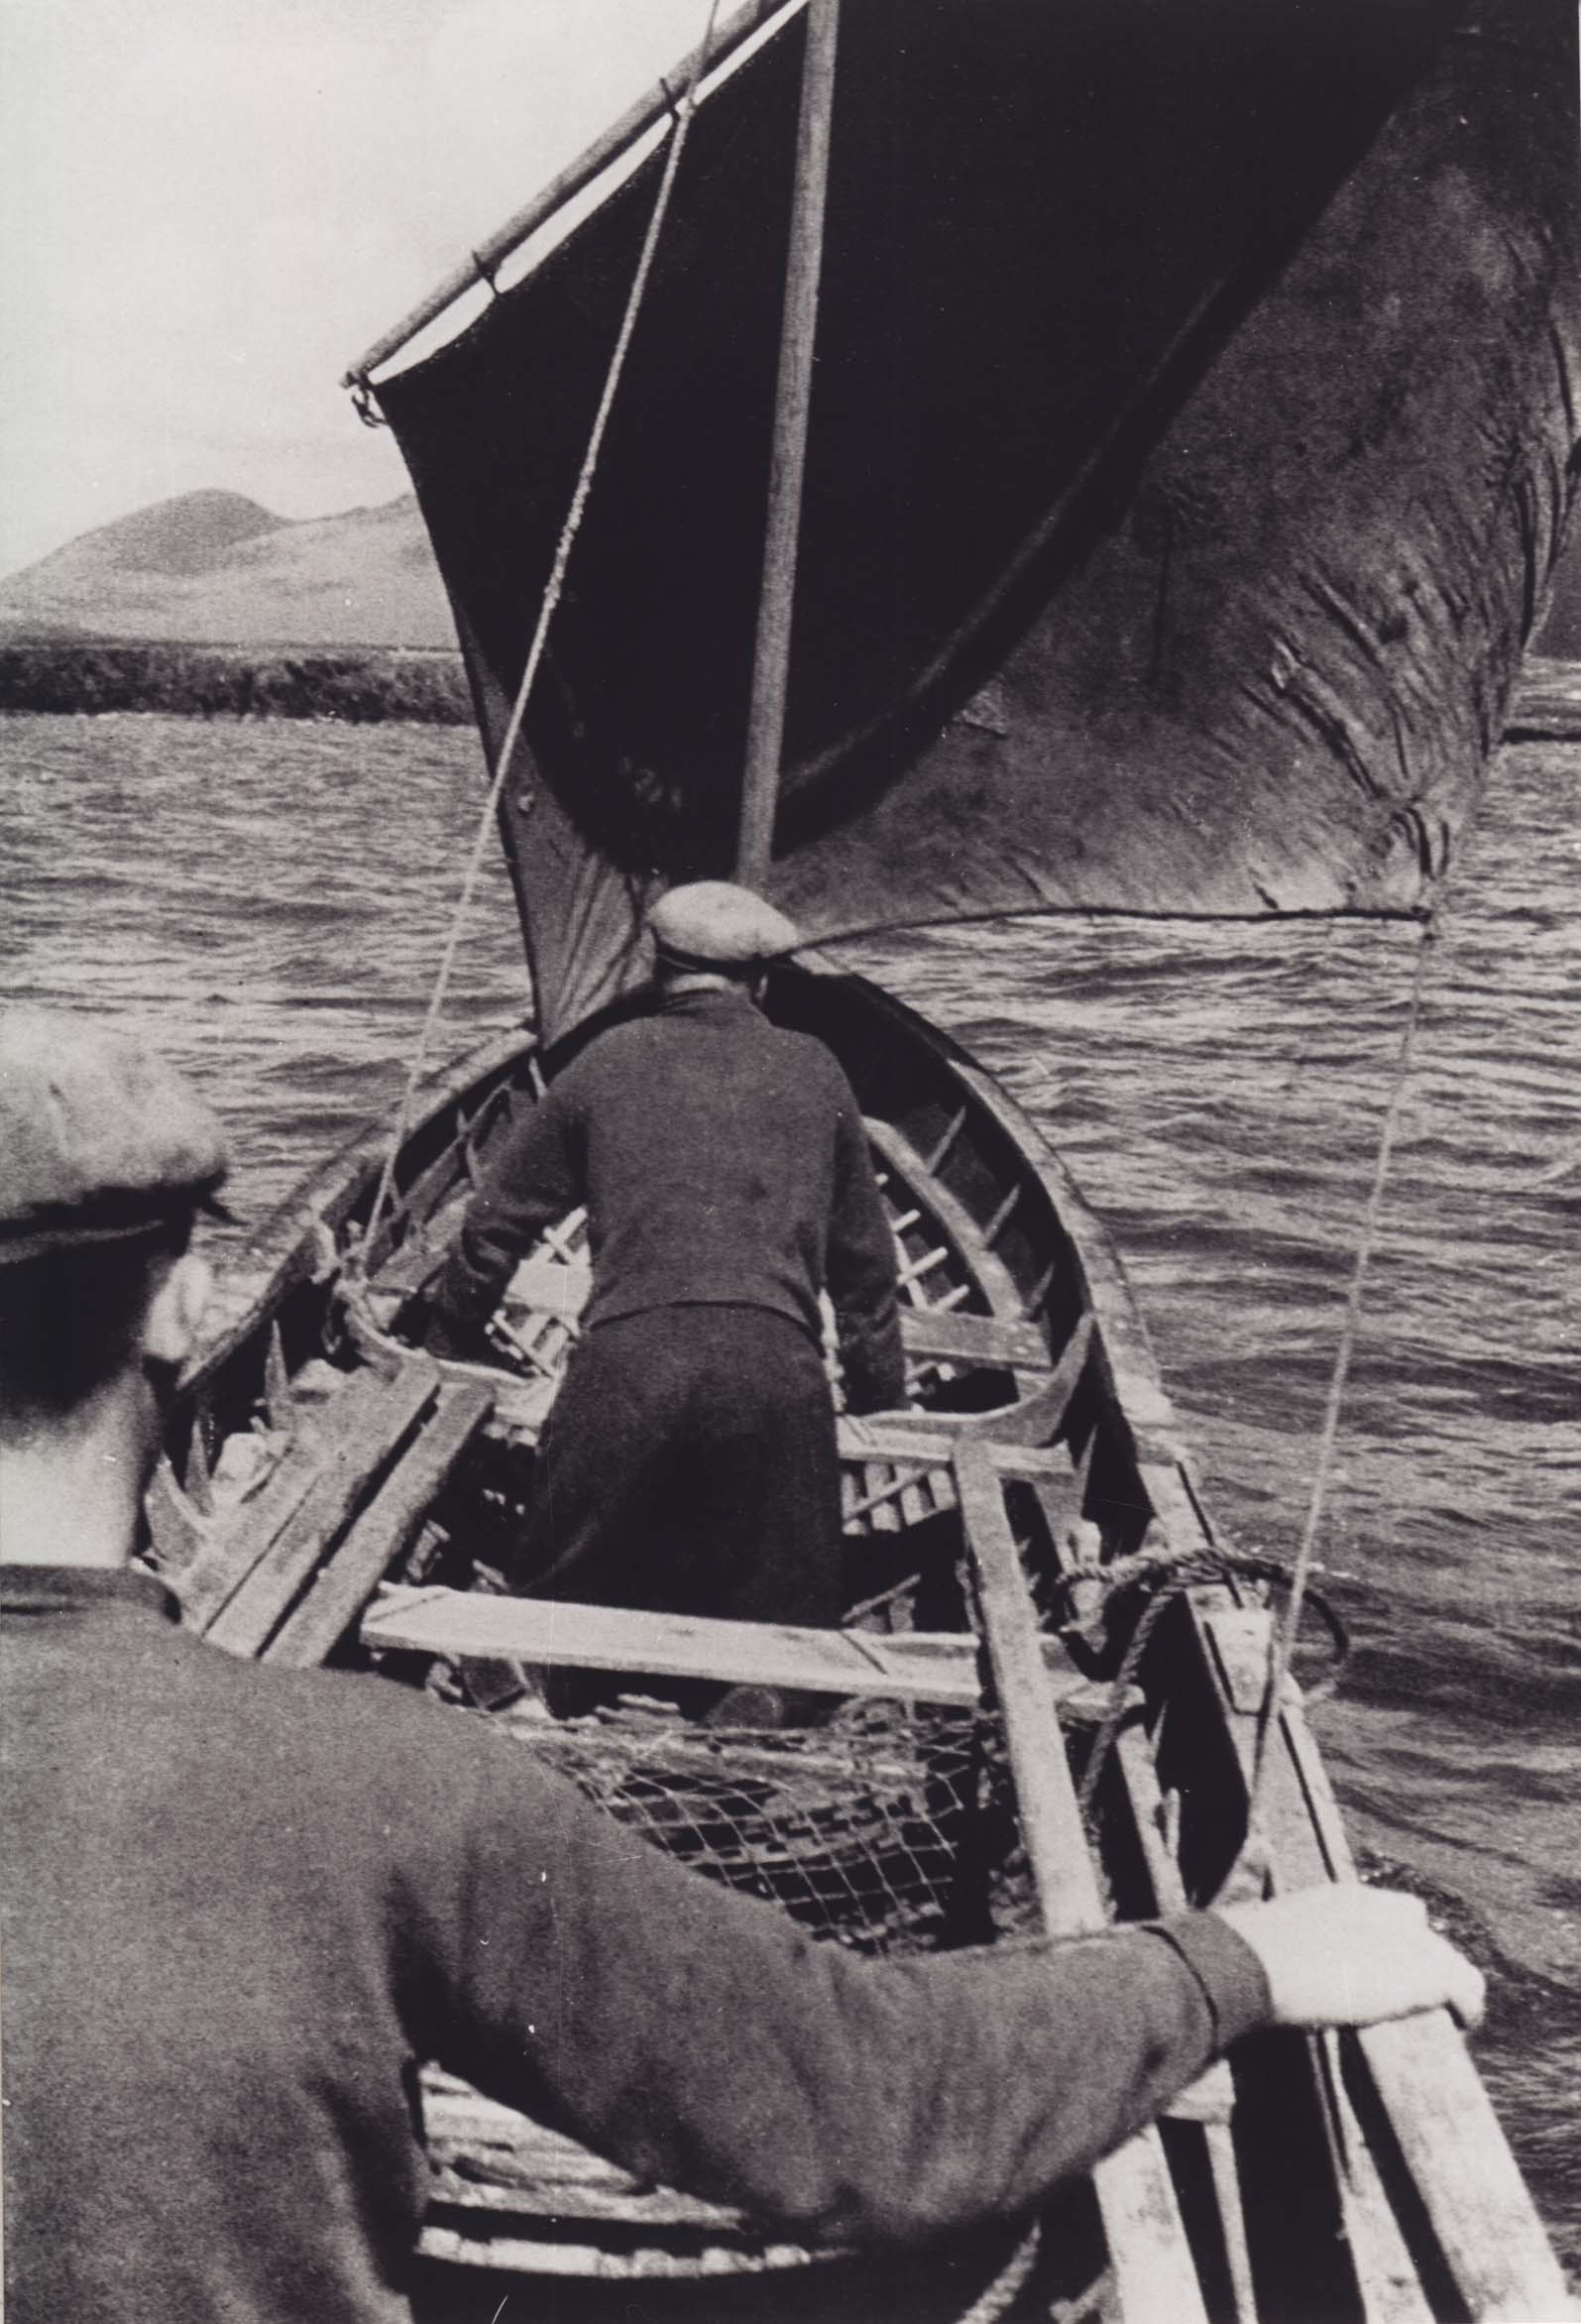 A naomhóg under sail. A sail was hoisted on the naomhógs during long journeys with favourable wind. Taken by Tomás Ó Muircheartaigh. Courtesy National Folklore Collection, UCD.